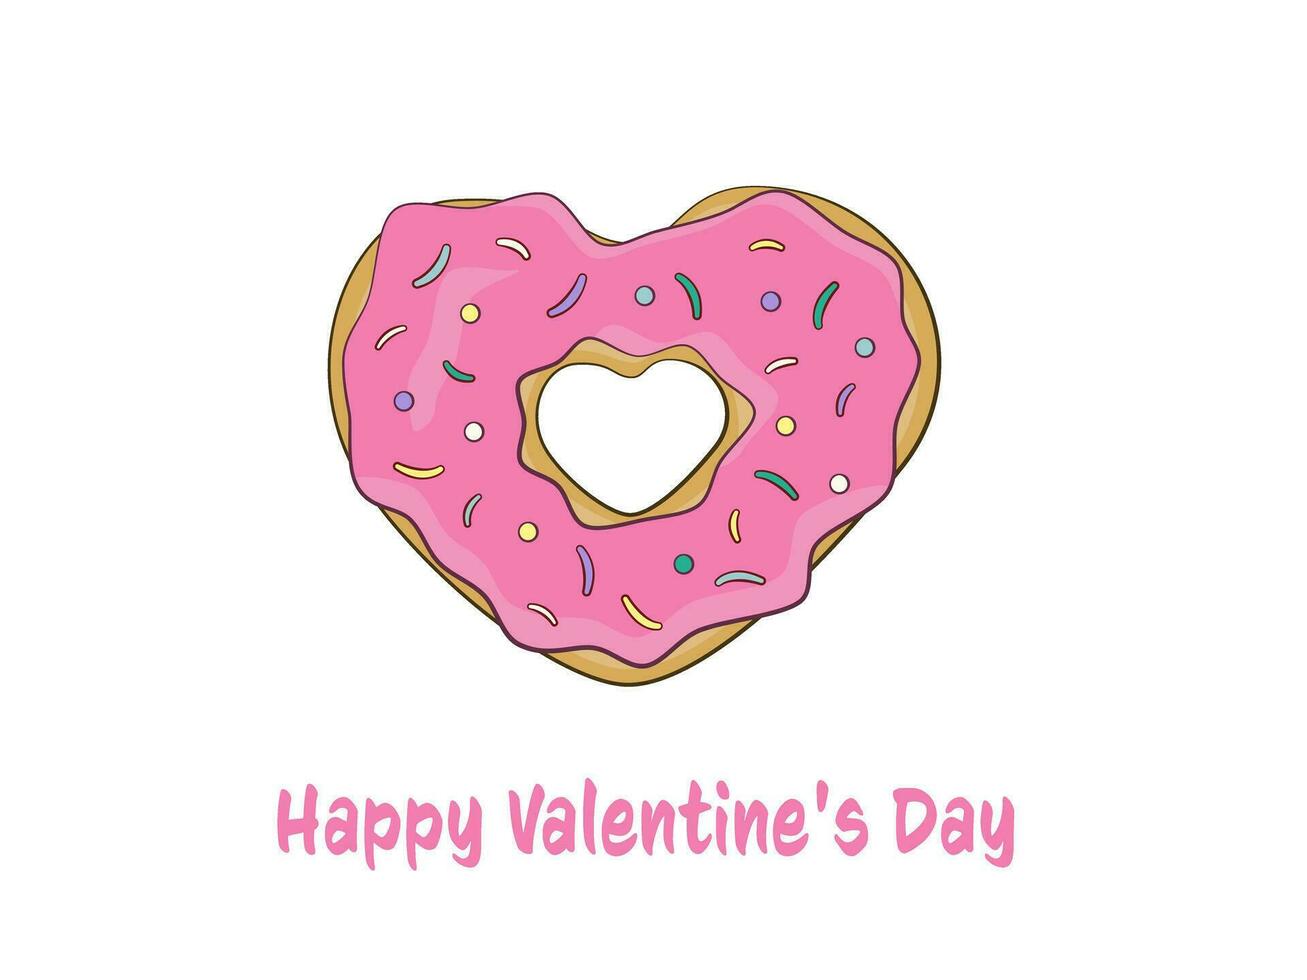 Happy Valentine's Day lettering with heart-shaped donut. vector